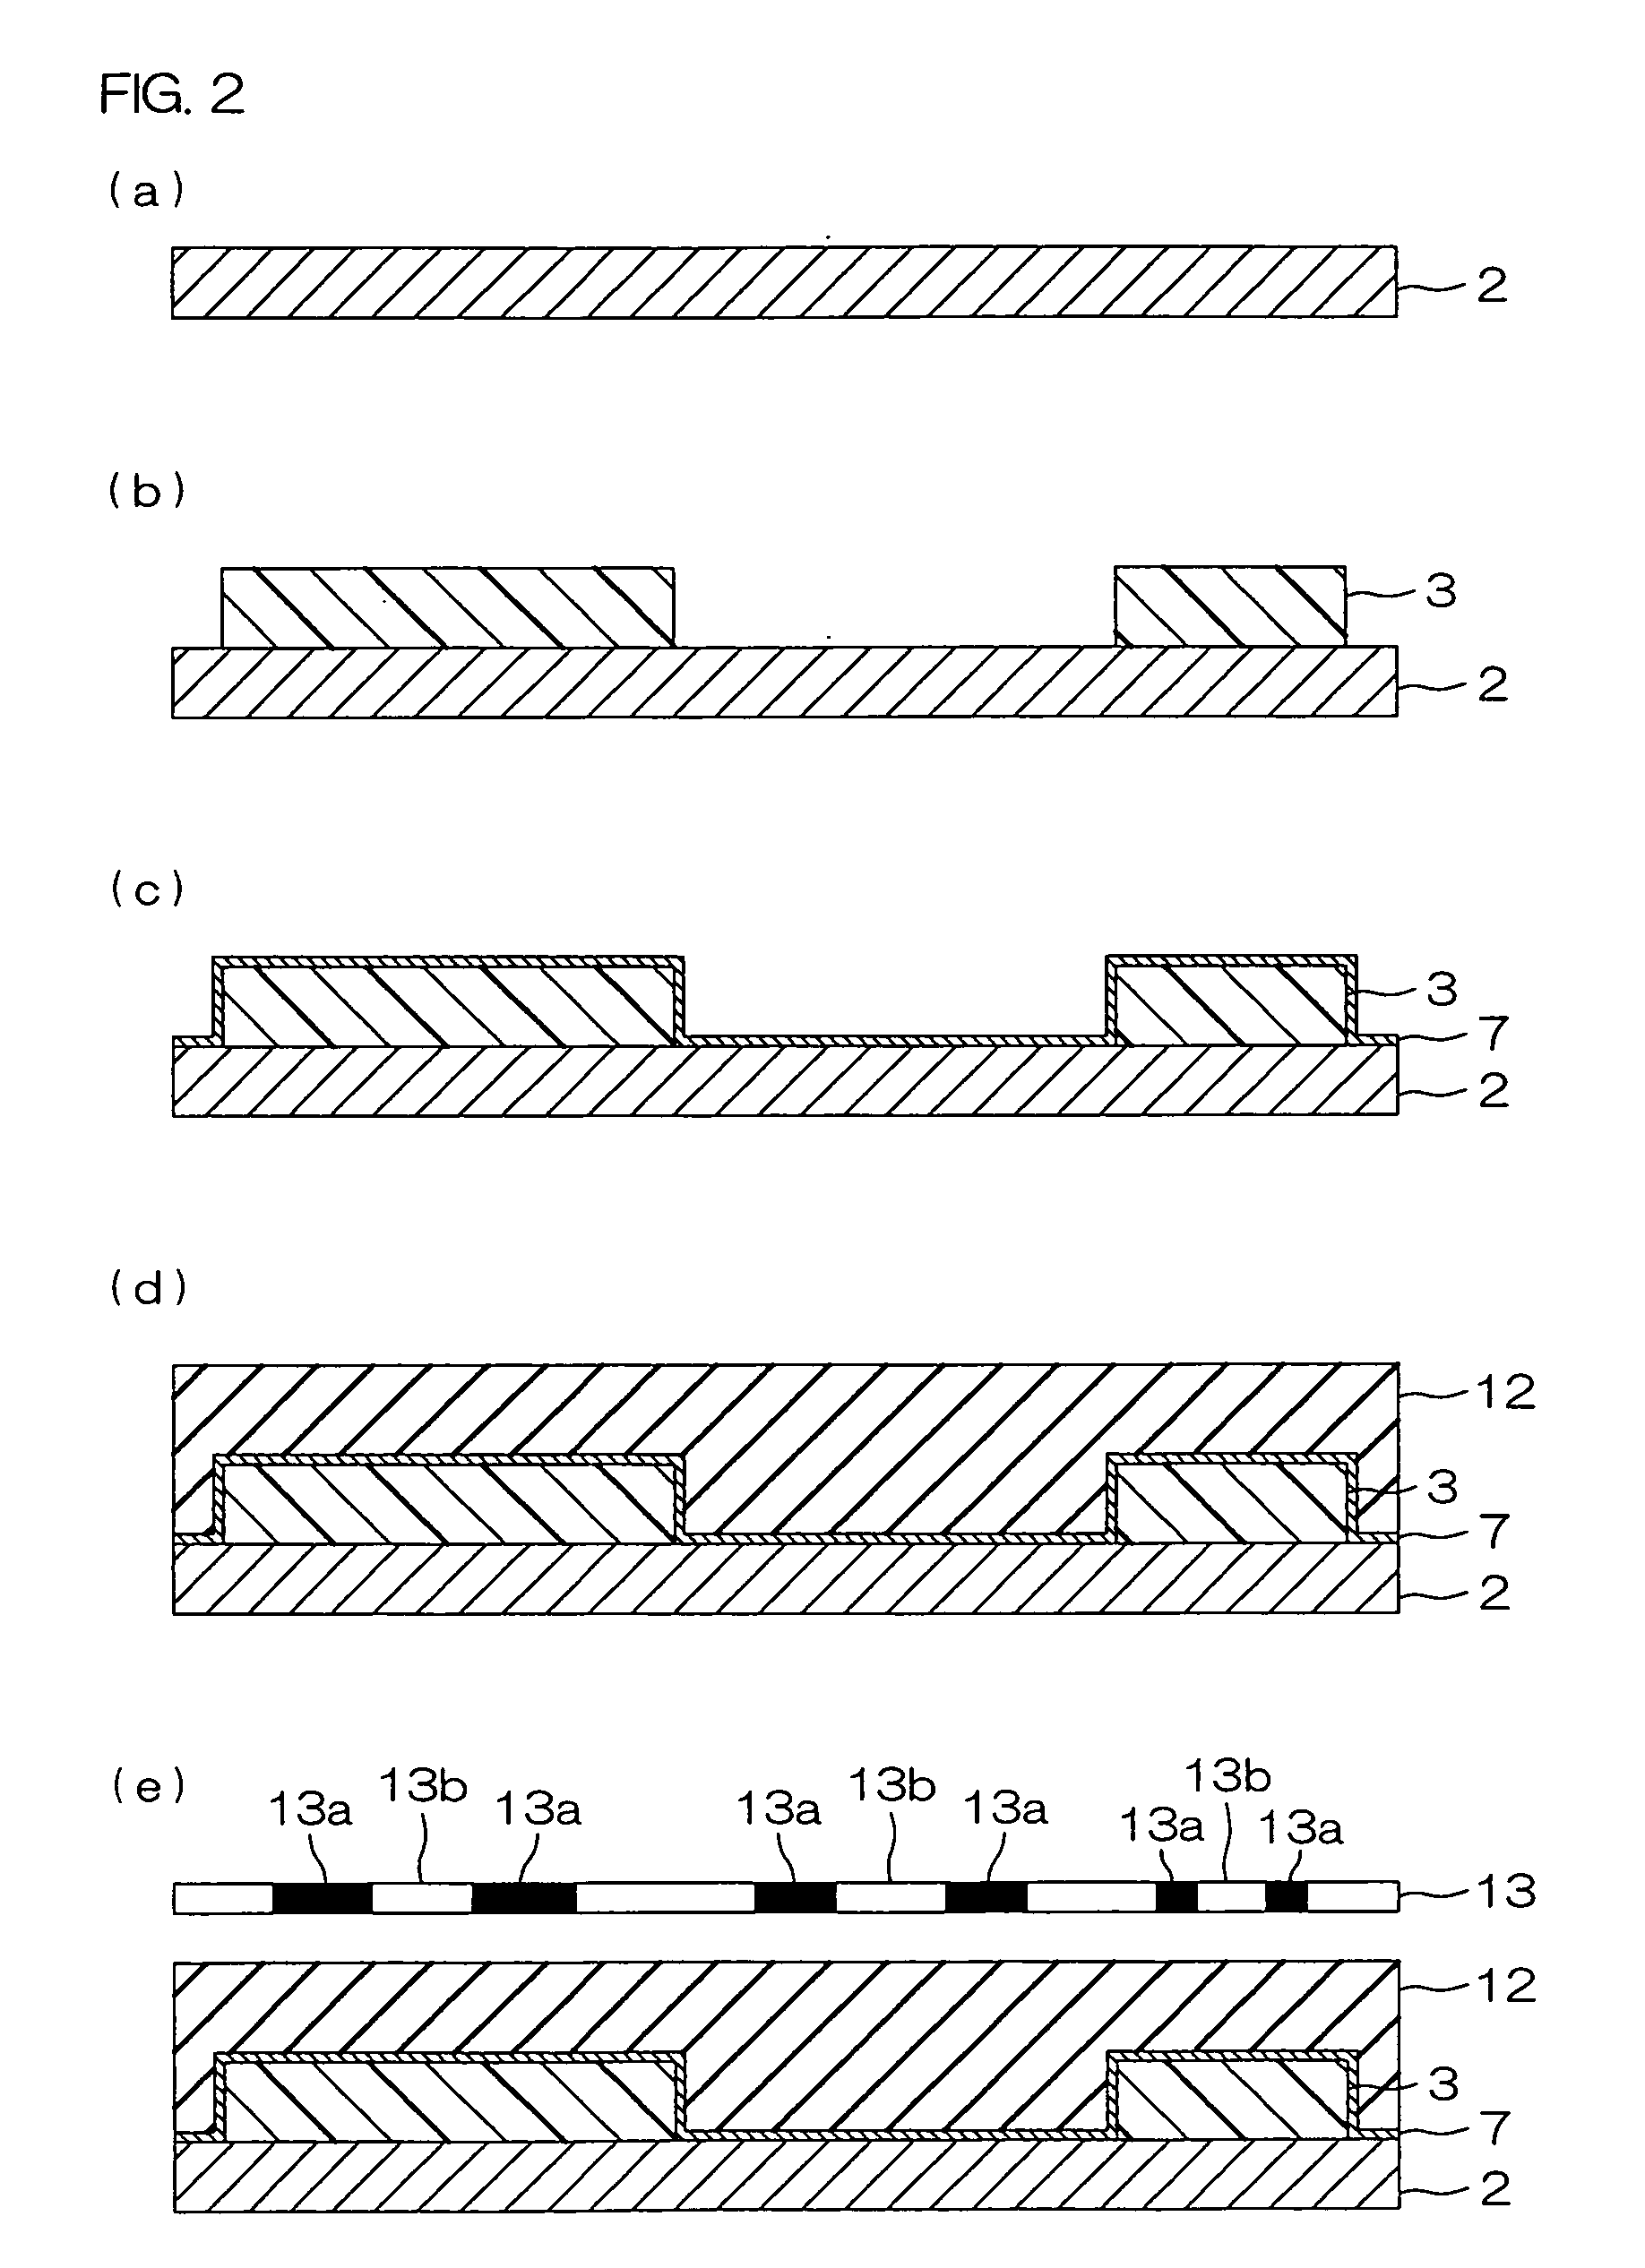 Producing method of suspension board with circuit